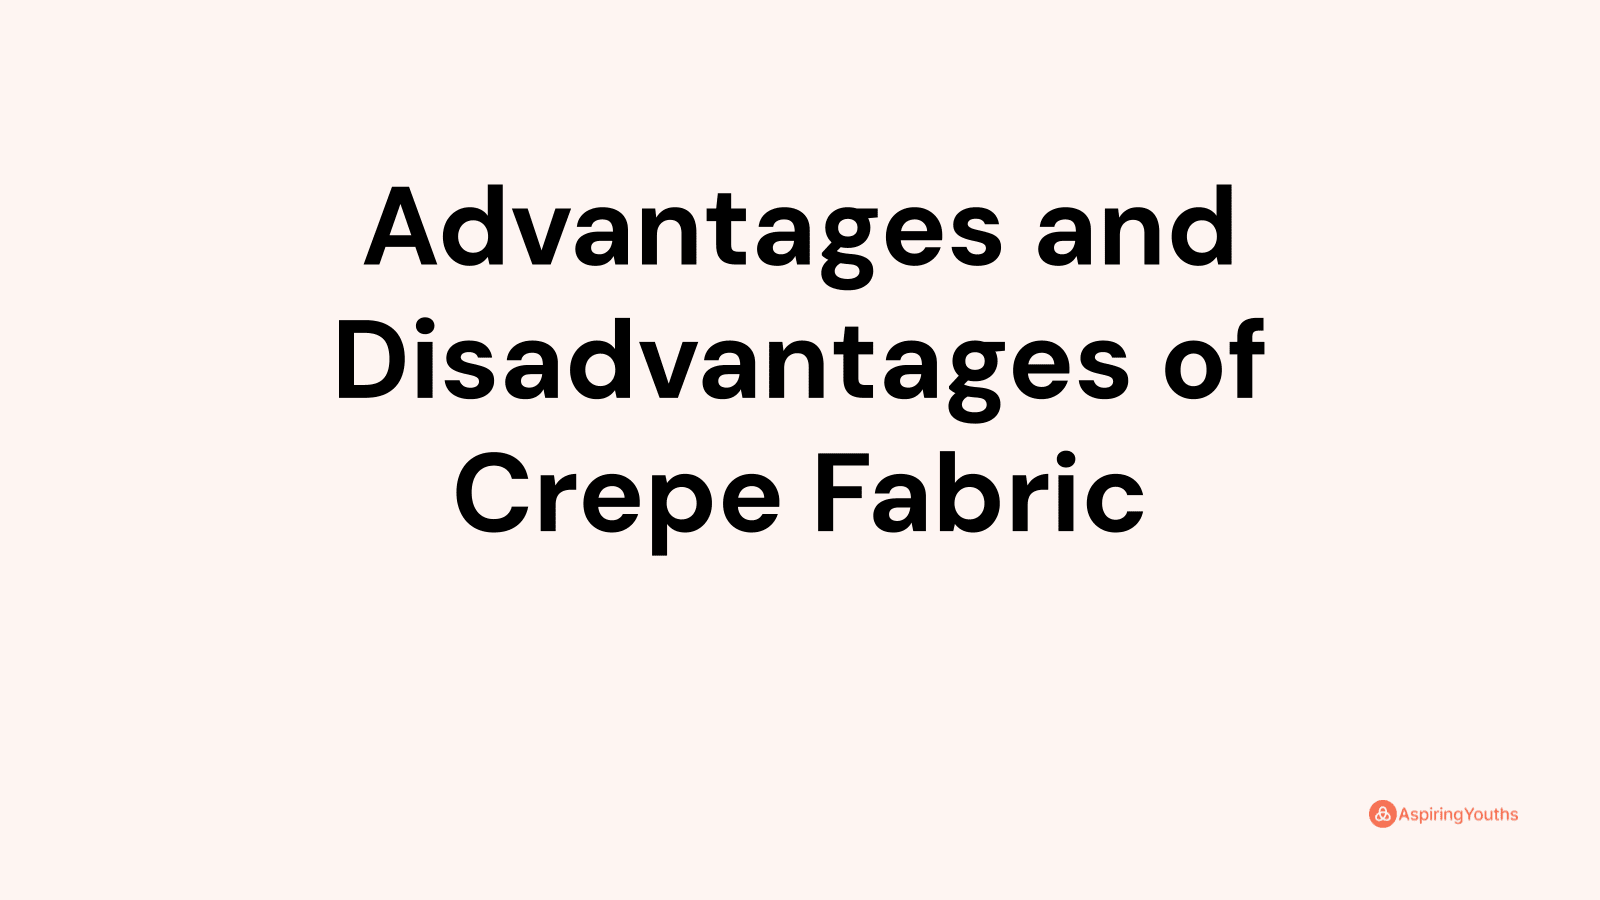 Advantages and Disadvantages of Crepe Fabric